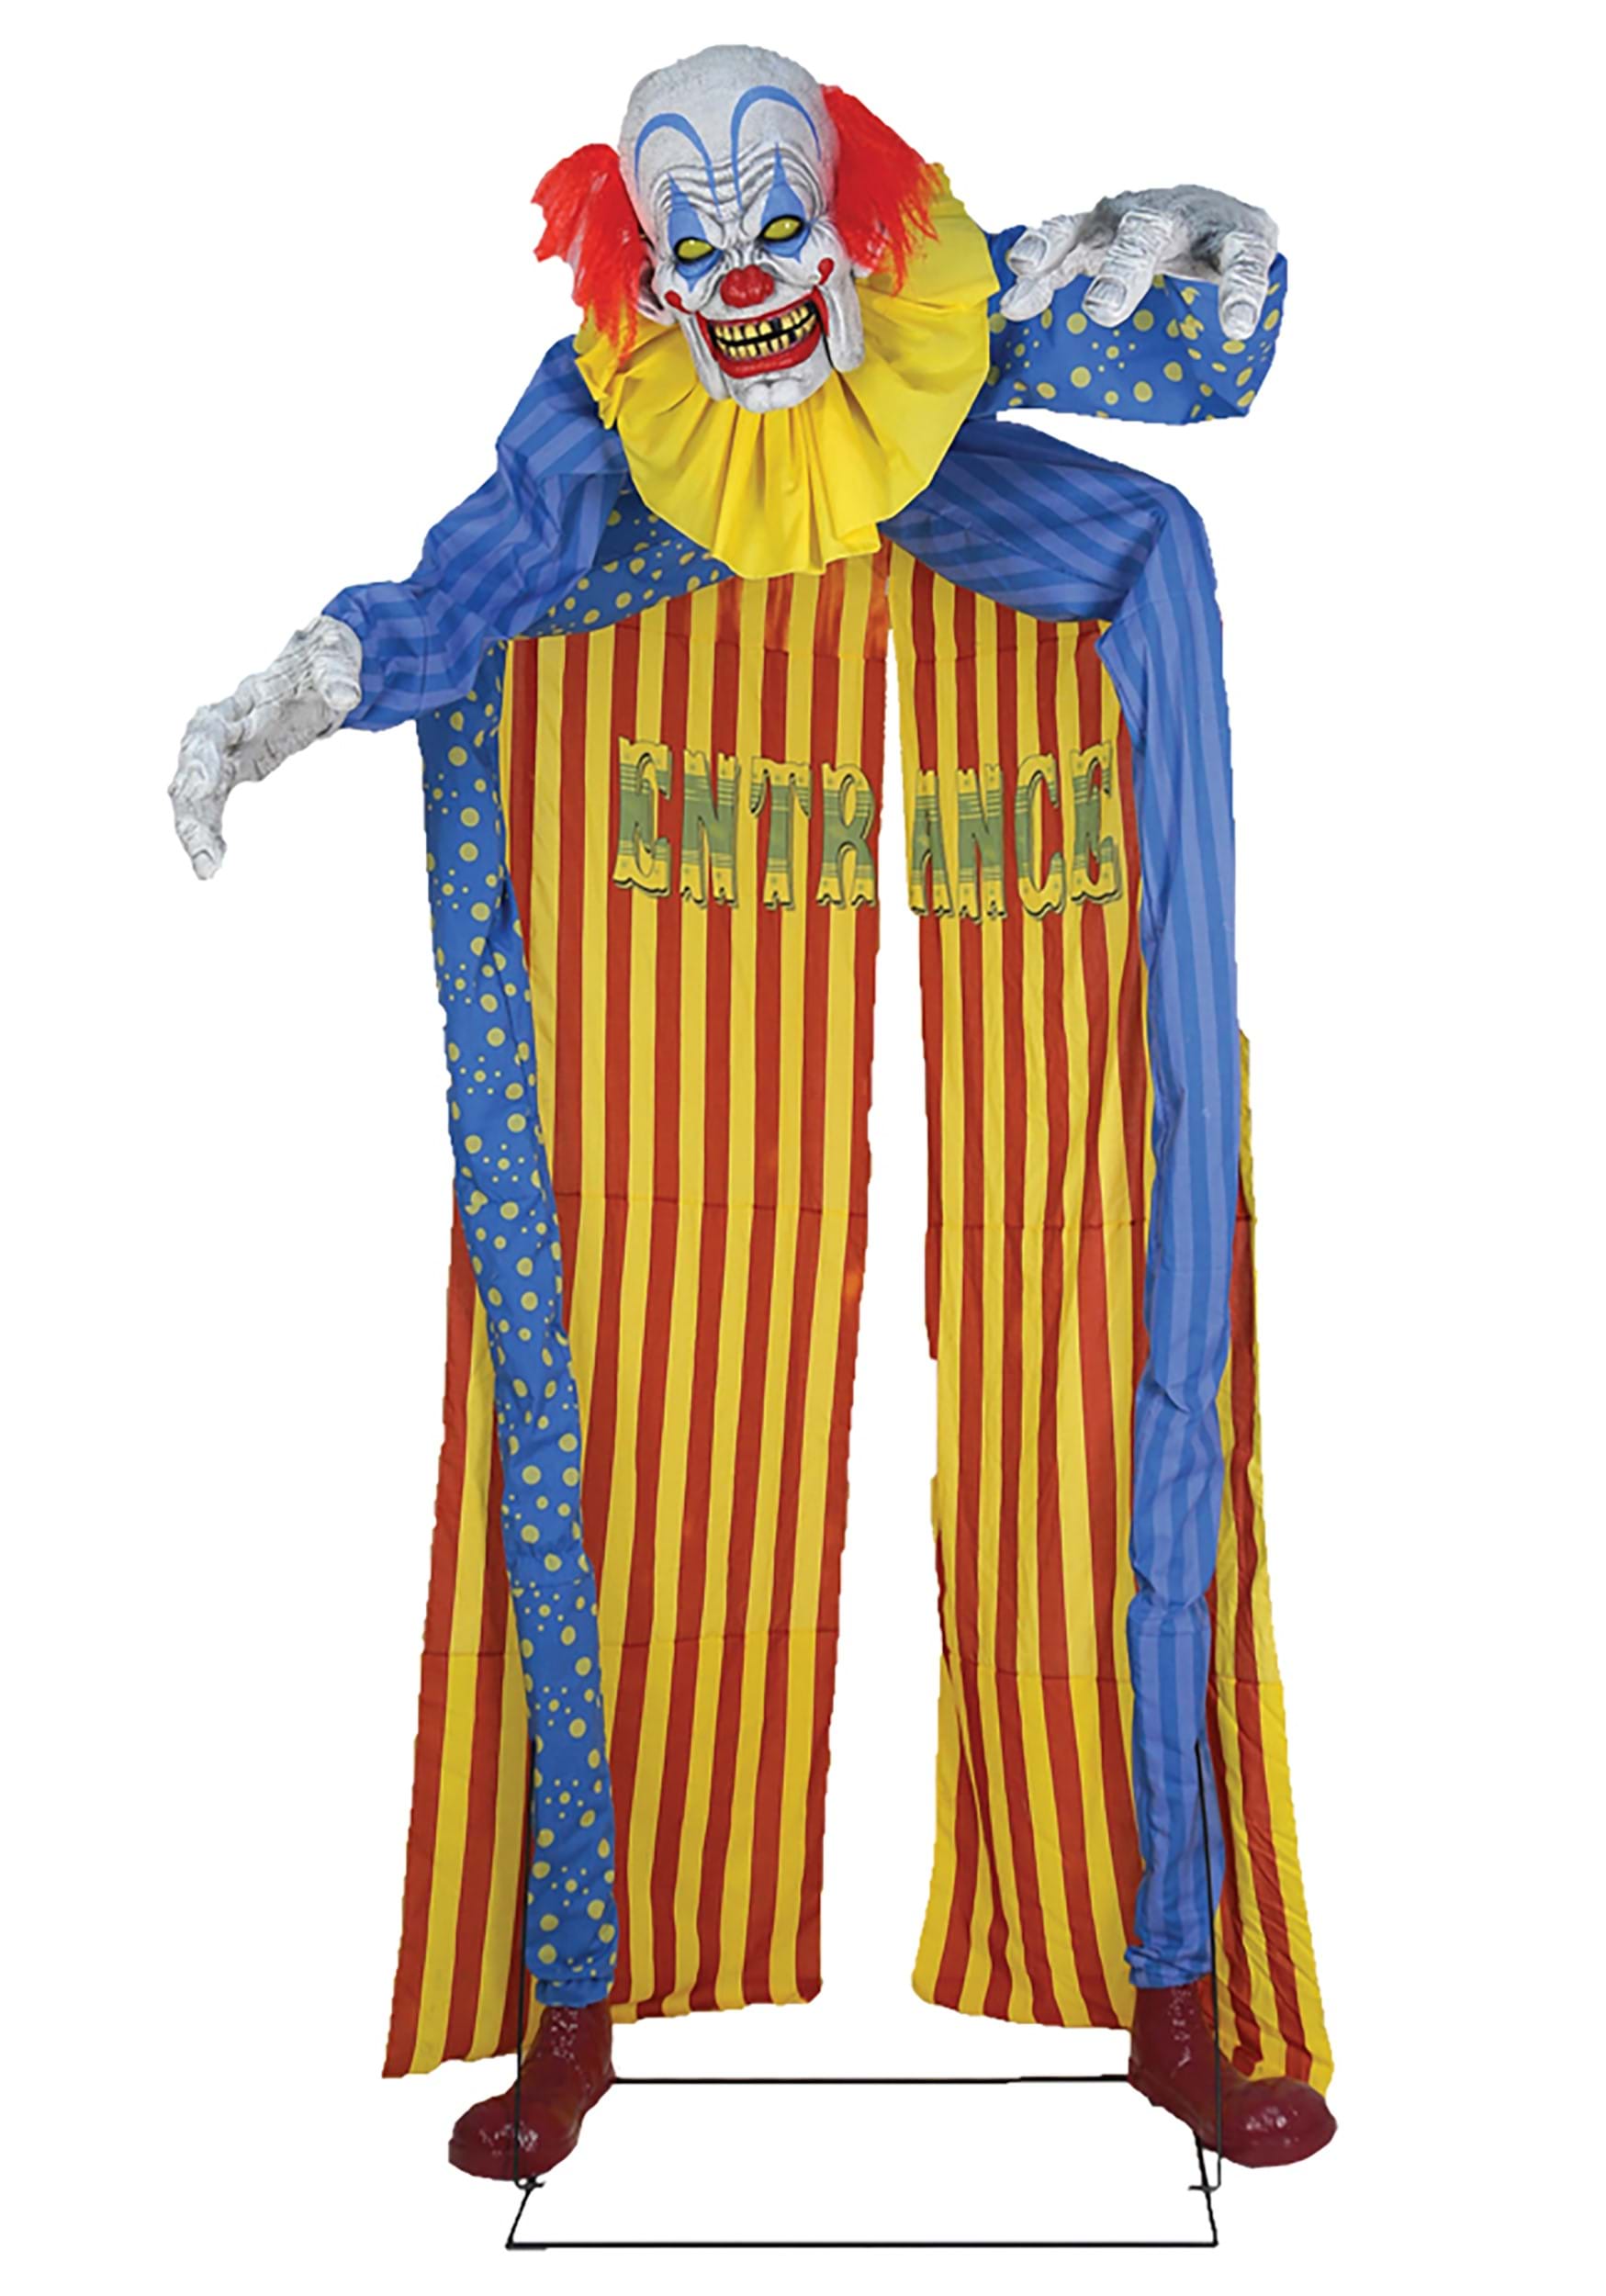 10 Foot Looming Clown Animated Archway Prop